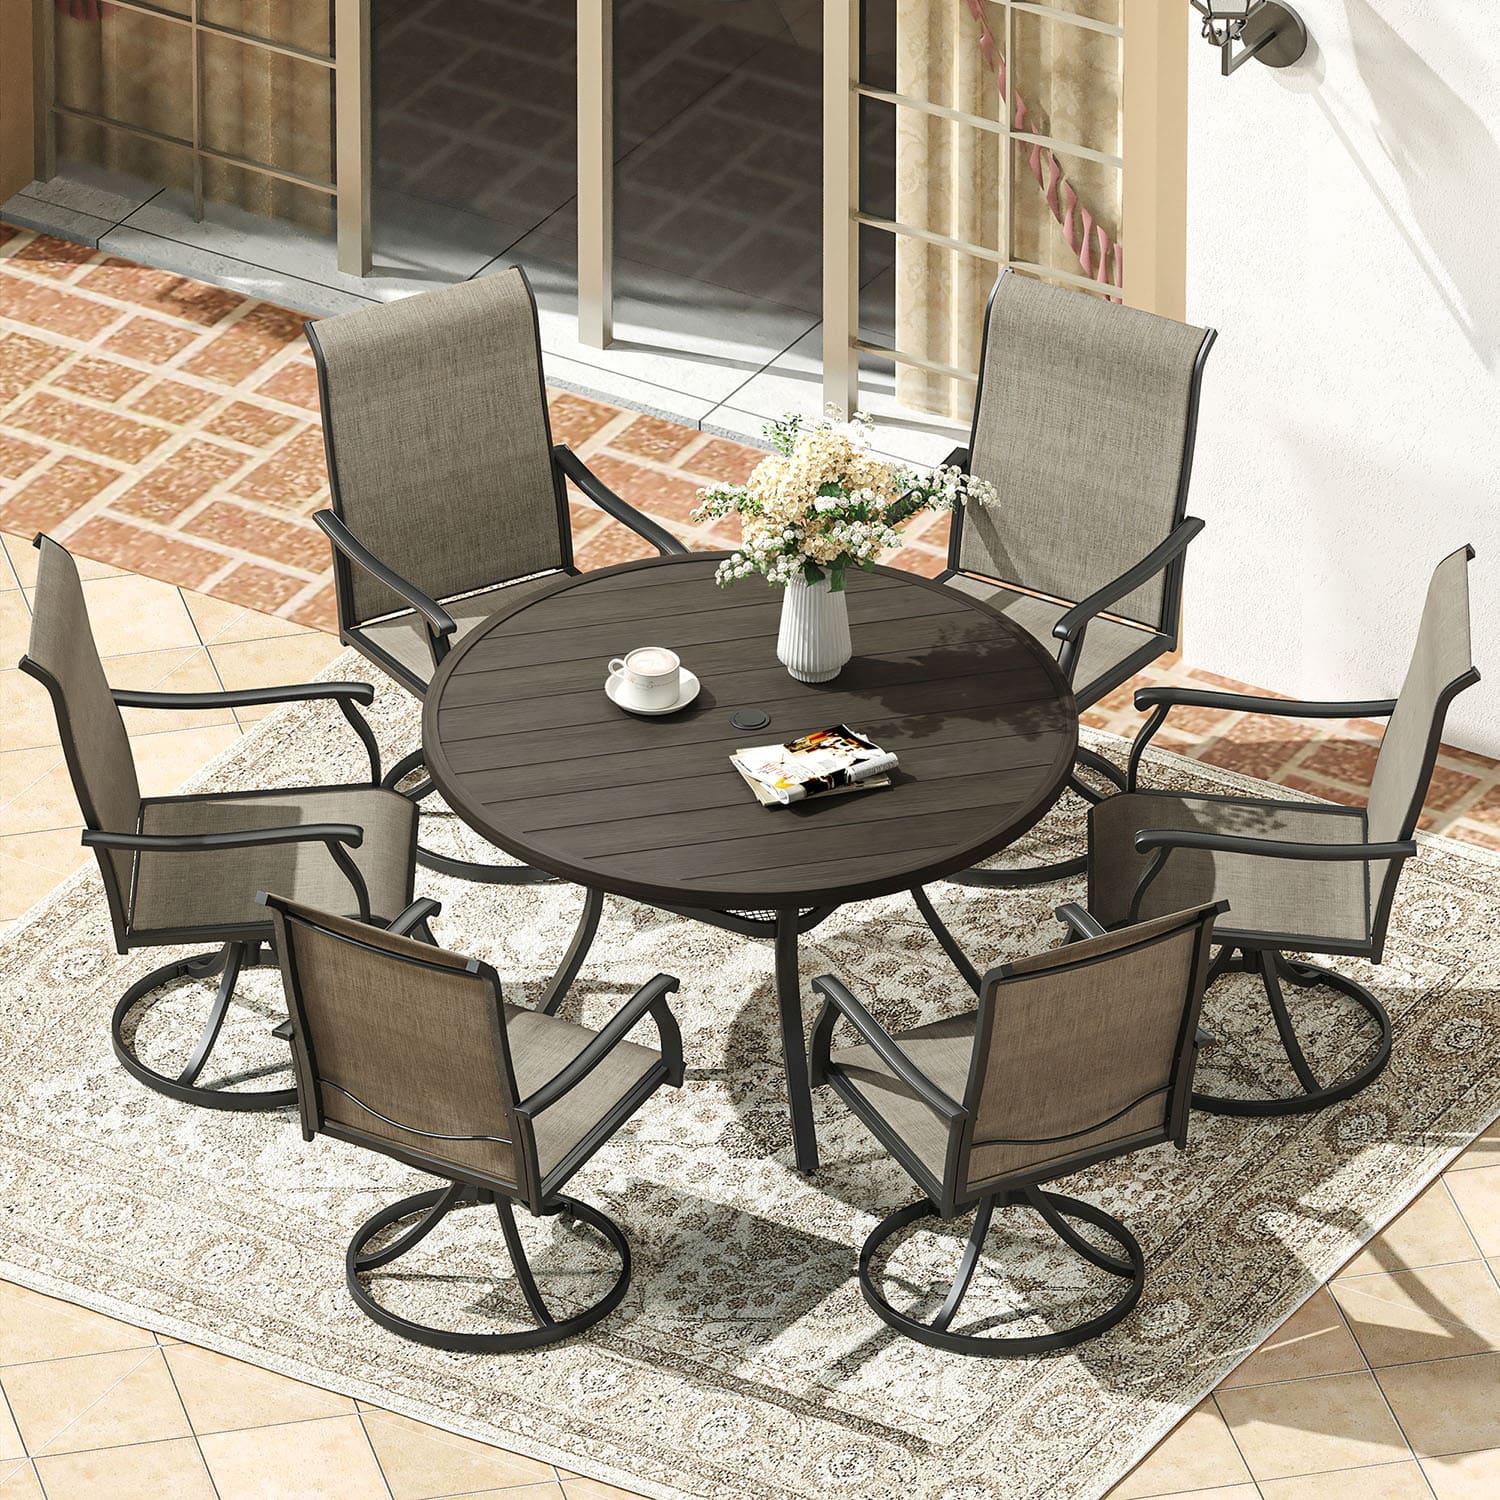 Vicllax 7 Pieces Outdoor Dining Set with 48" Round Dining Table and Swivel Chairs